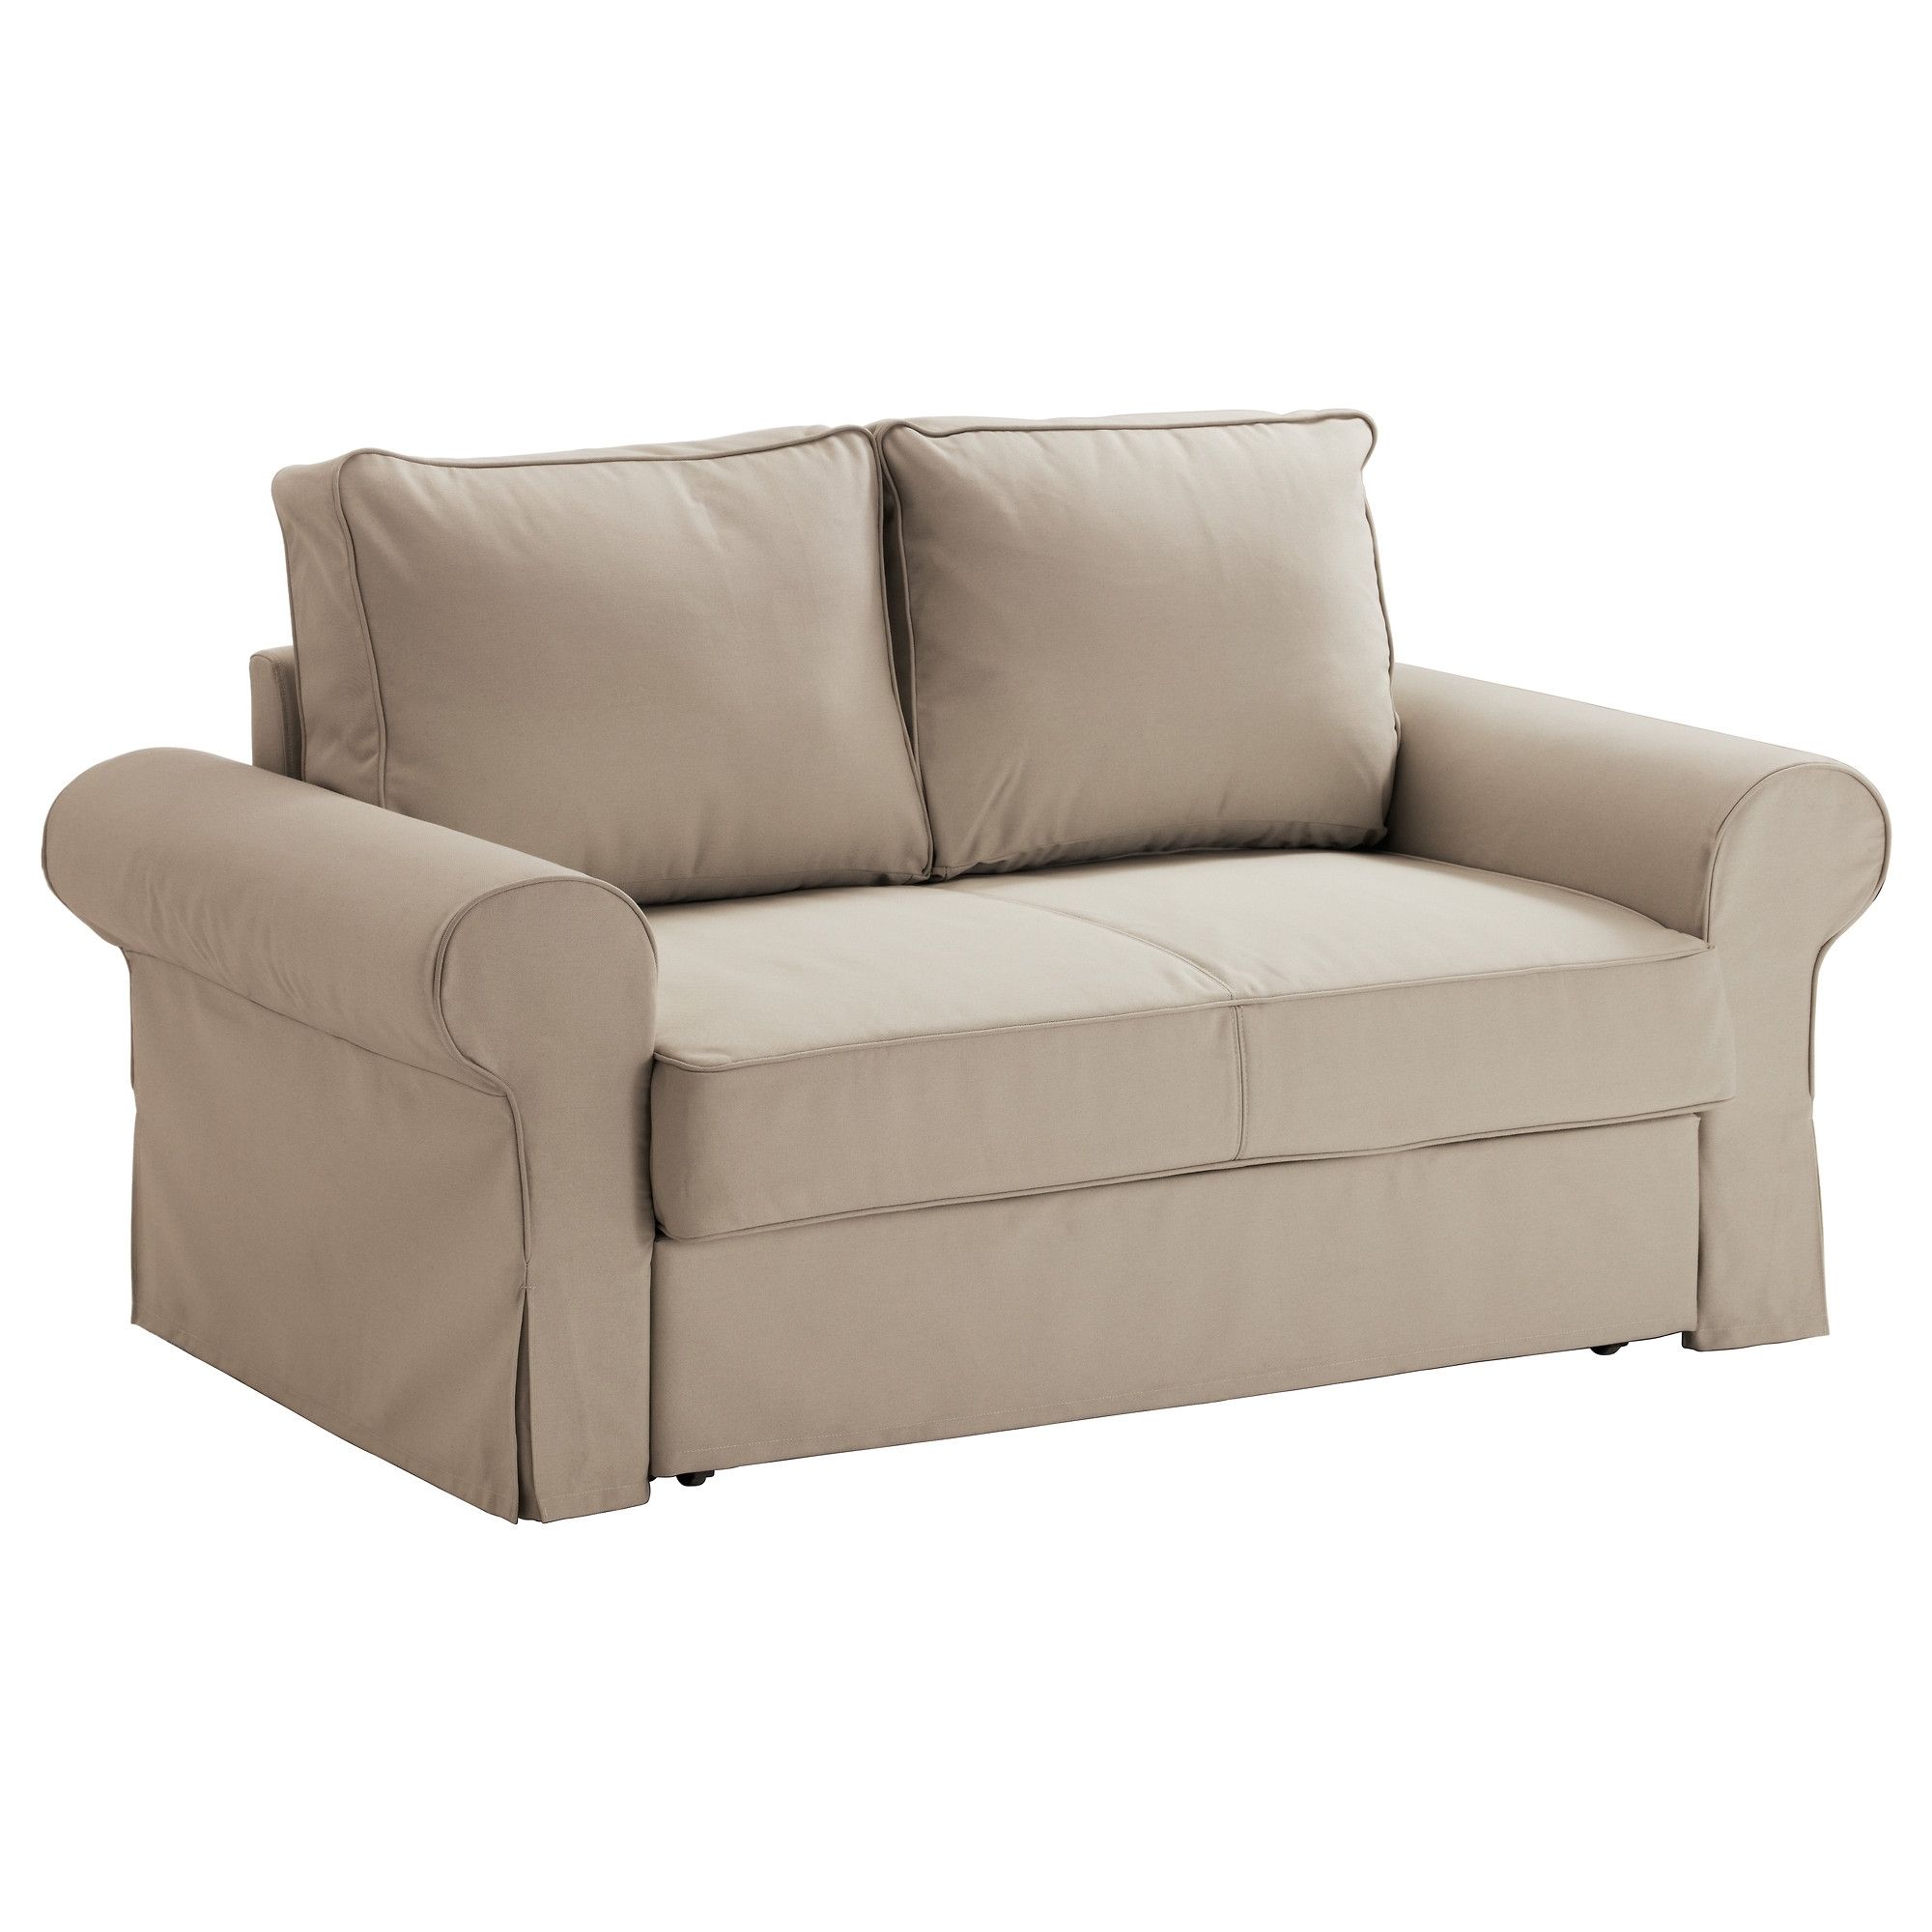 Trendy Ikea Two Seater Sofas Inside Backabro Two Seat Sofa Bed Ramna Beige – Ikea (View 10 of 15)